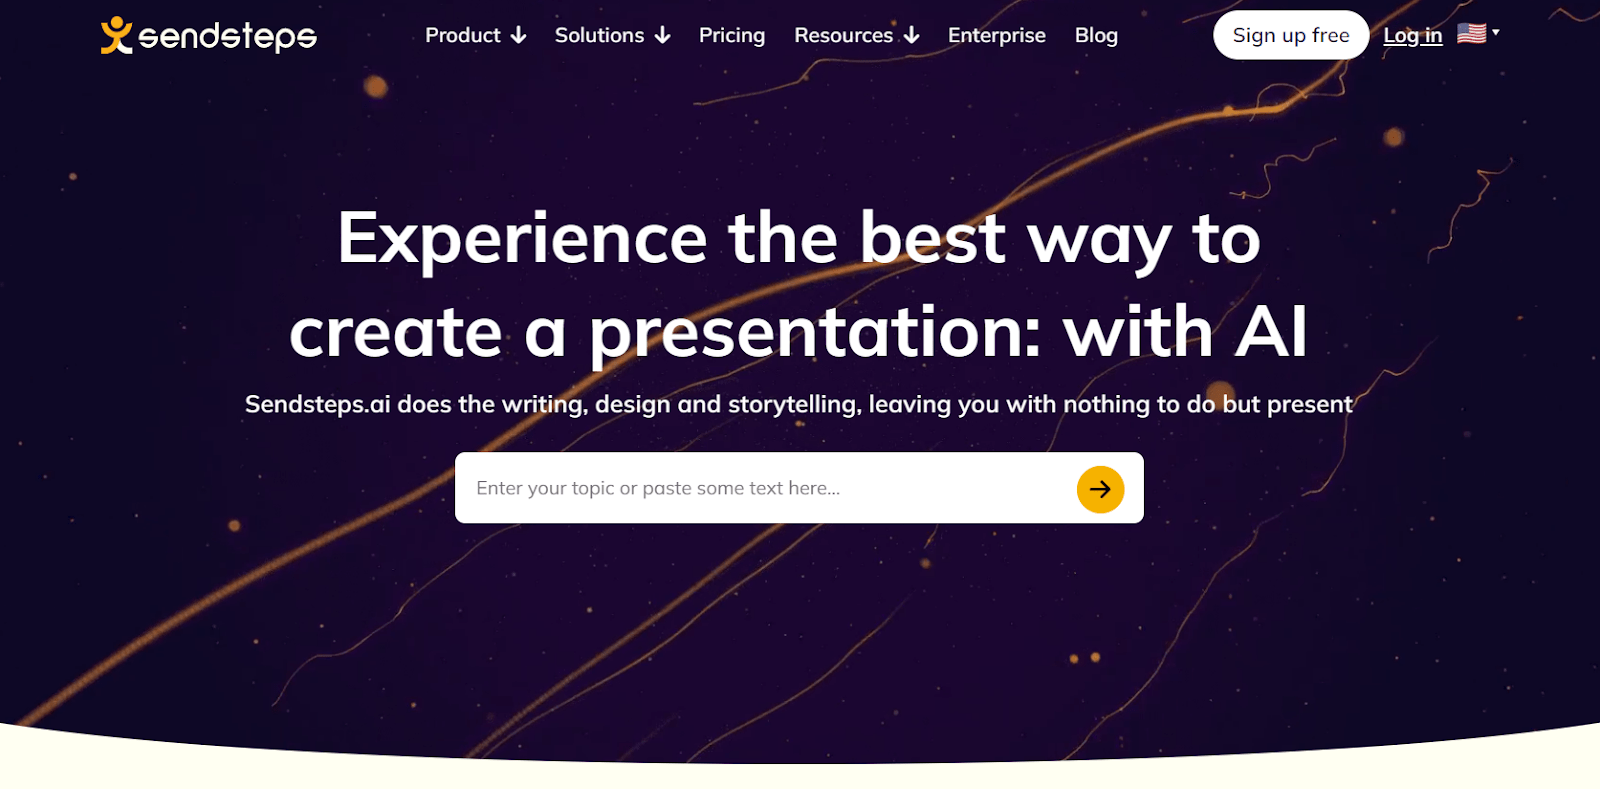 sendsteps website - experience the best way to create a presentation